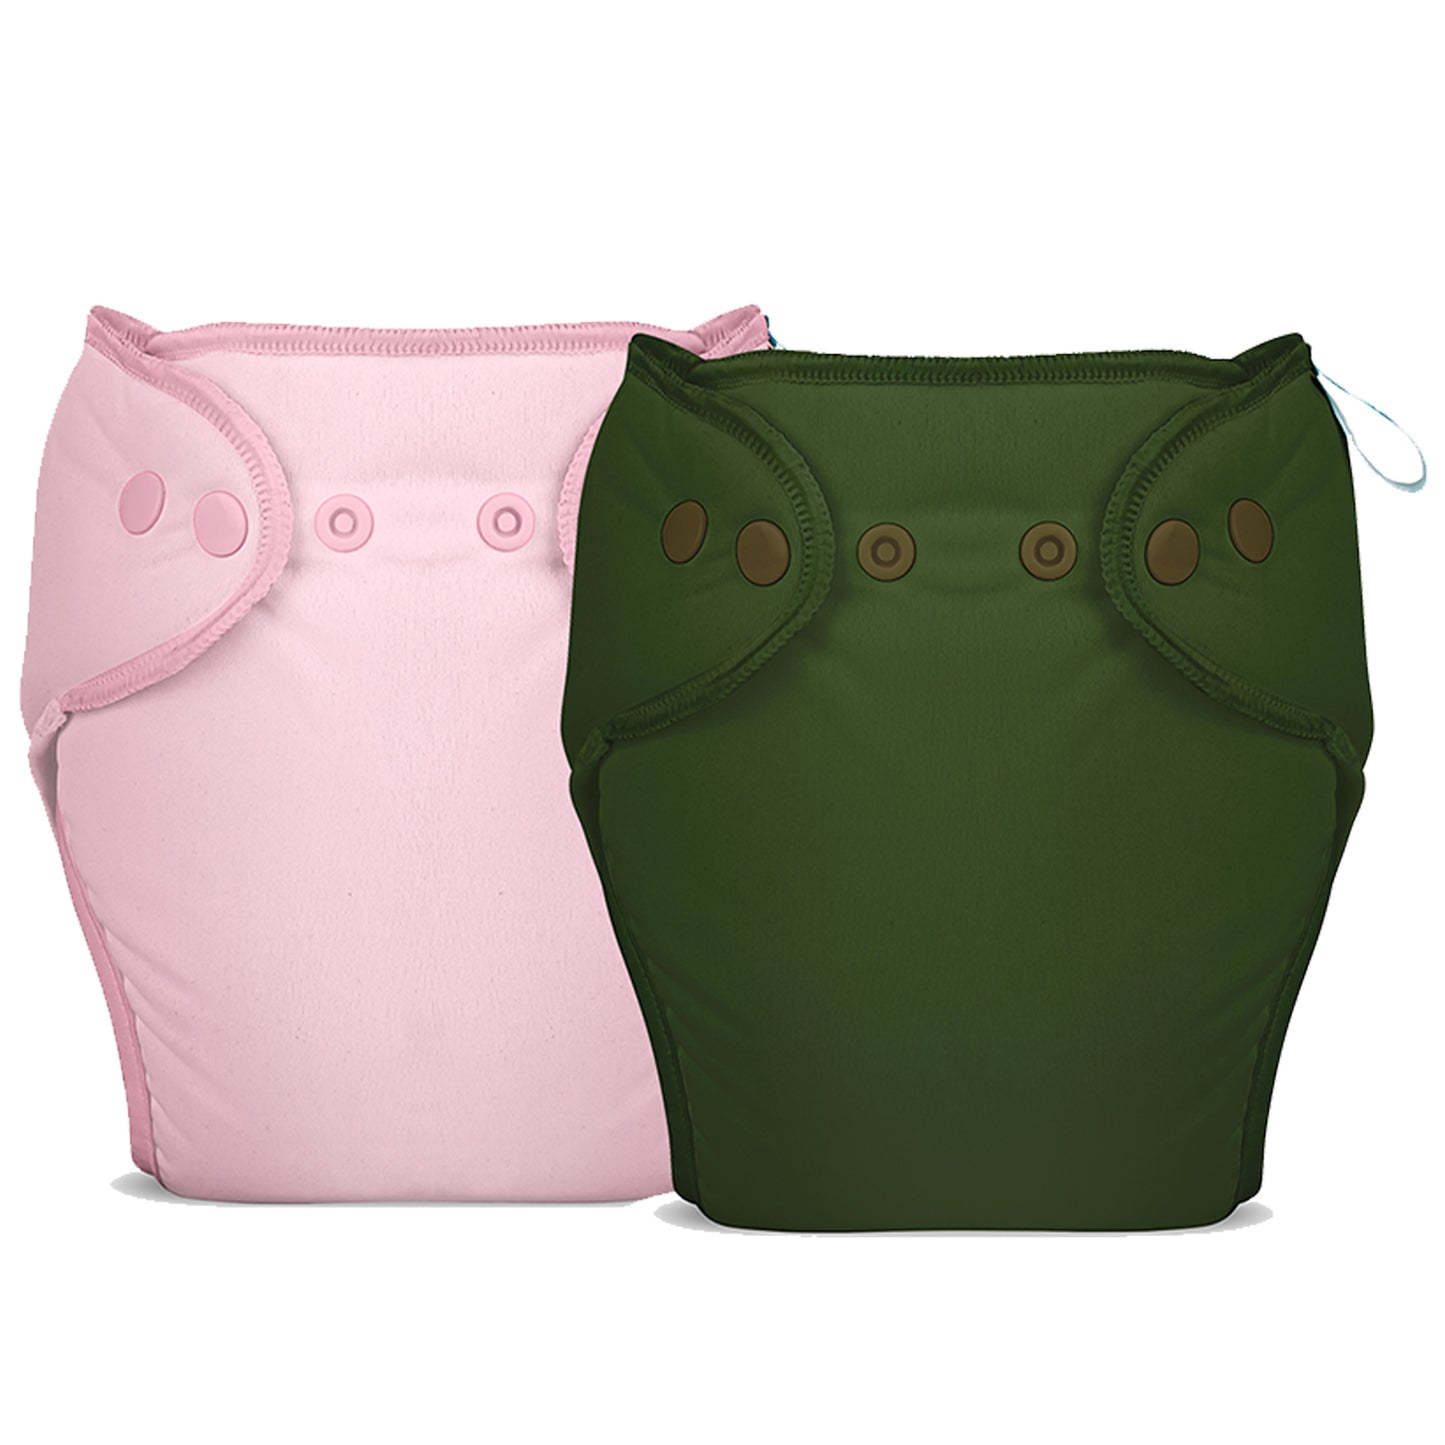 2 Piece Pack of New & Improved Smart Nappy for 10-18 months old (Size LXL)